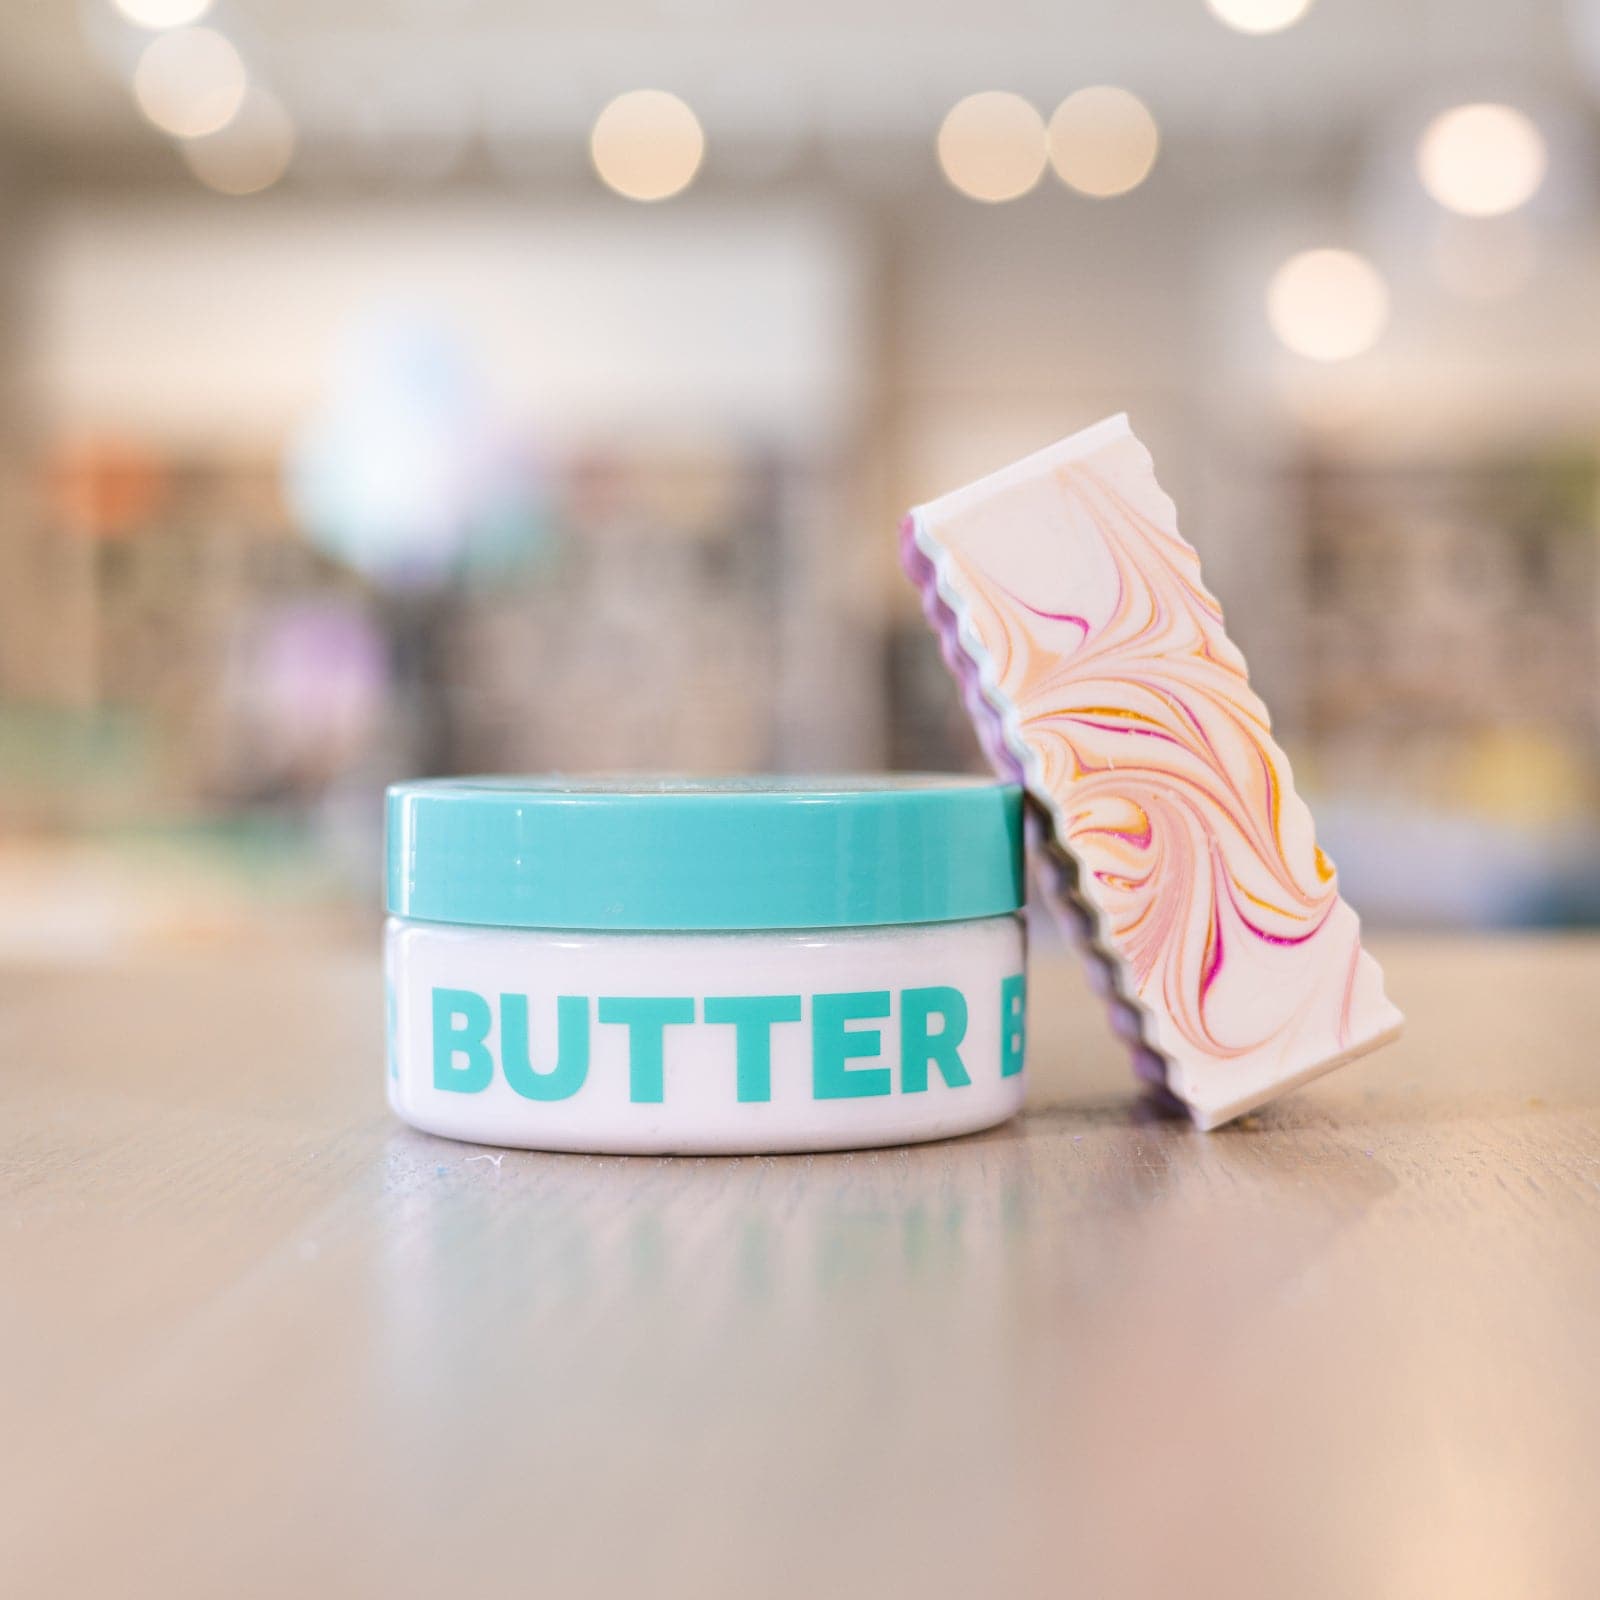 Soap bar with pink and yellow design leaning on body butter container on counter